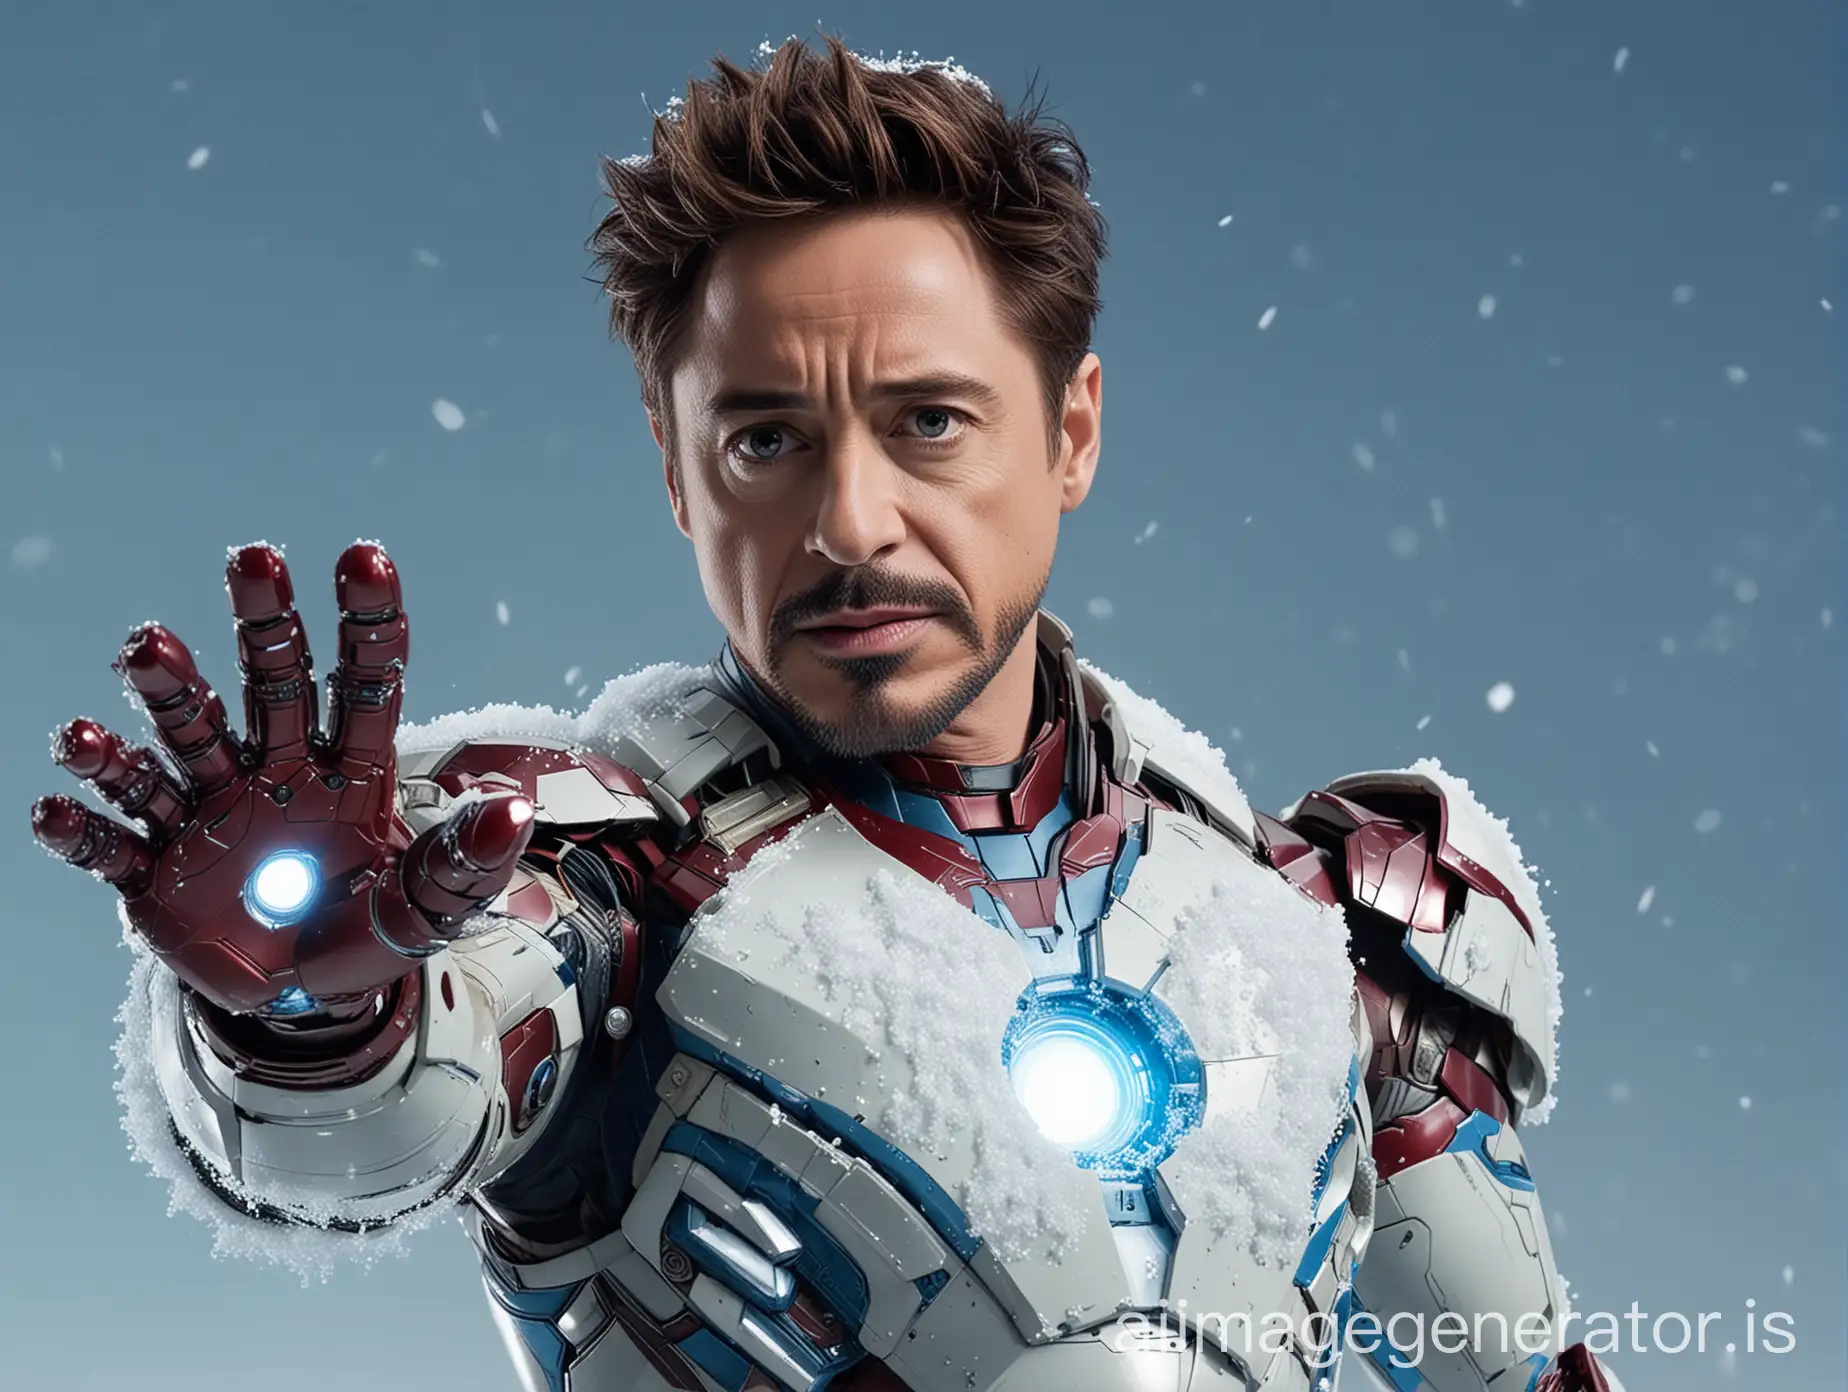 Robert Downey as iron man in complete white and blue suit, glowing object in hand, white snow in background, blue background